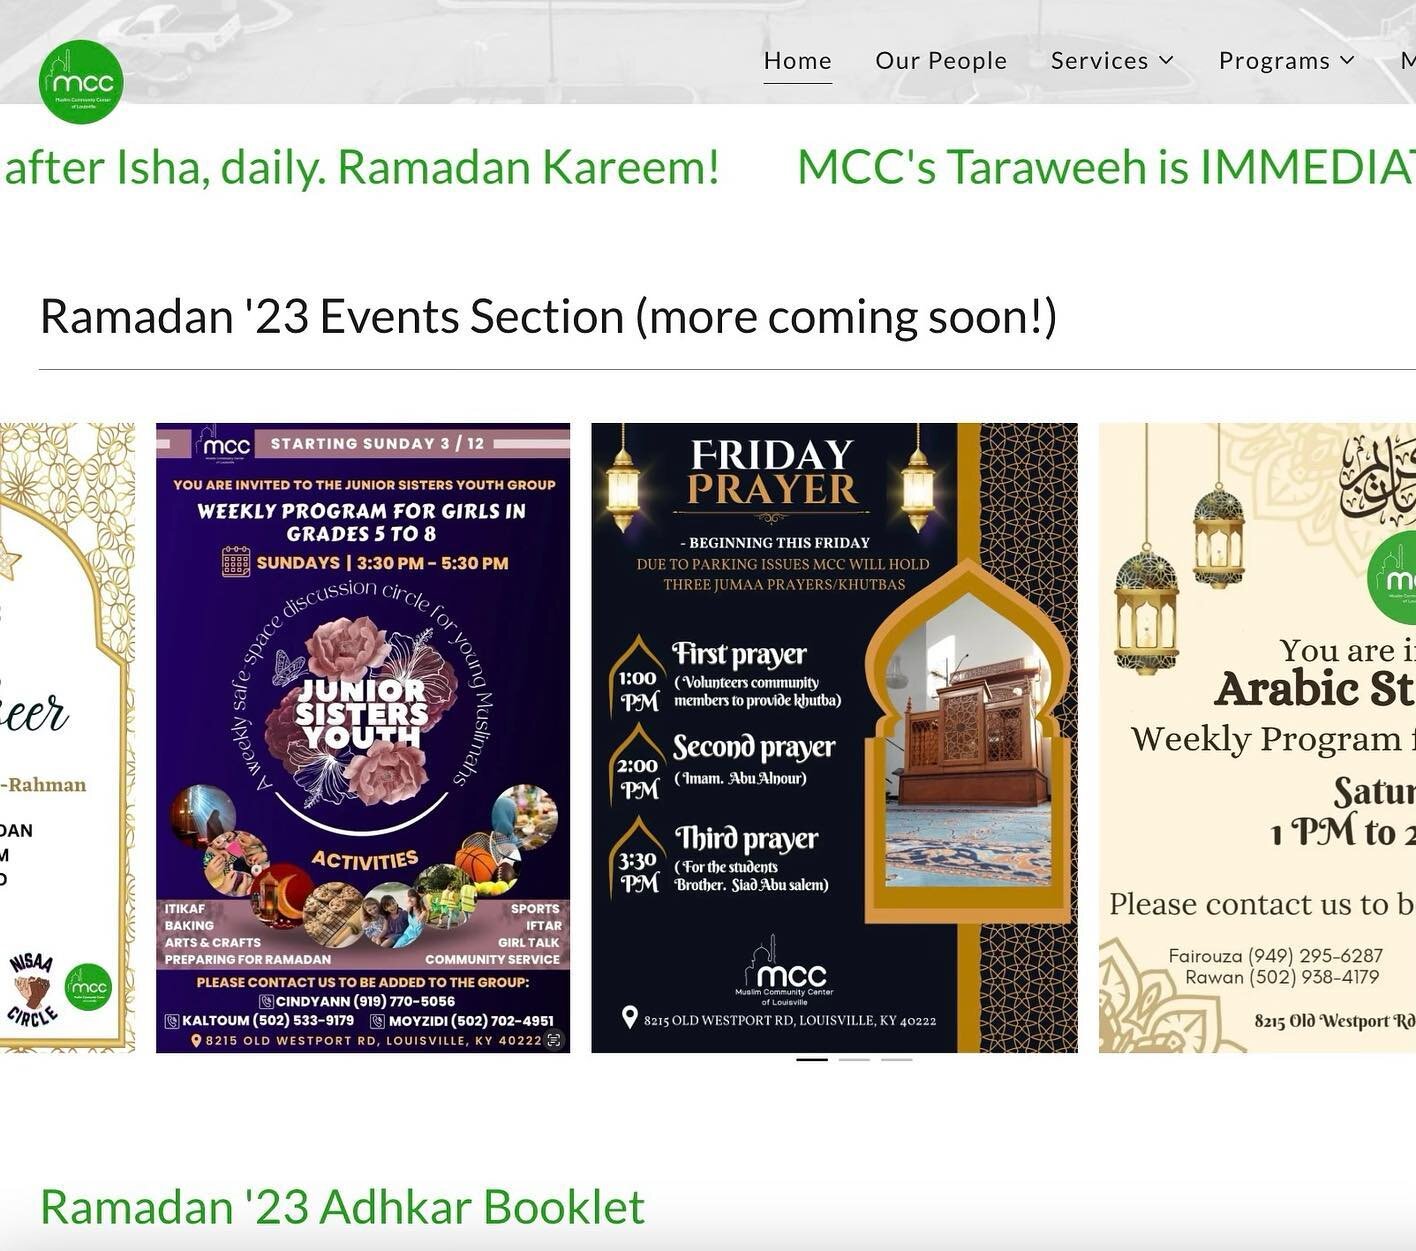 Have you seen our new website?
Visit our official site (mcclou.org) now for an update on all things MCC! 💻 

Our designated Ramadan '23 Events section has the most up-to-date announcements and flyers on events we're planning throughout this month! T